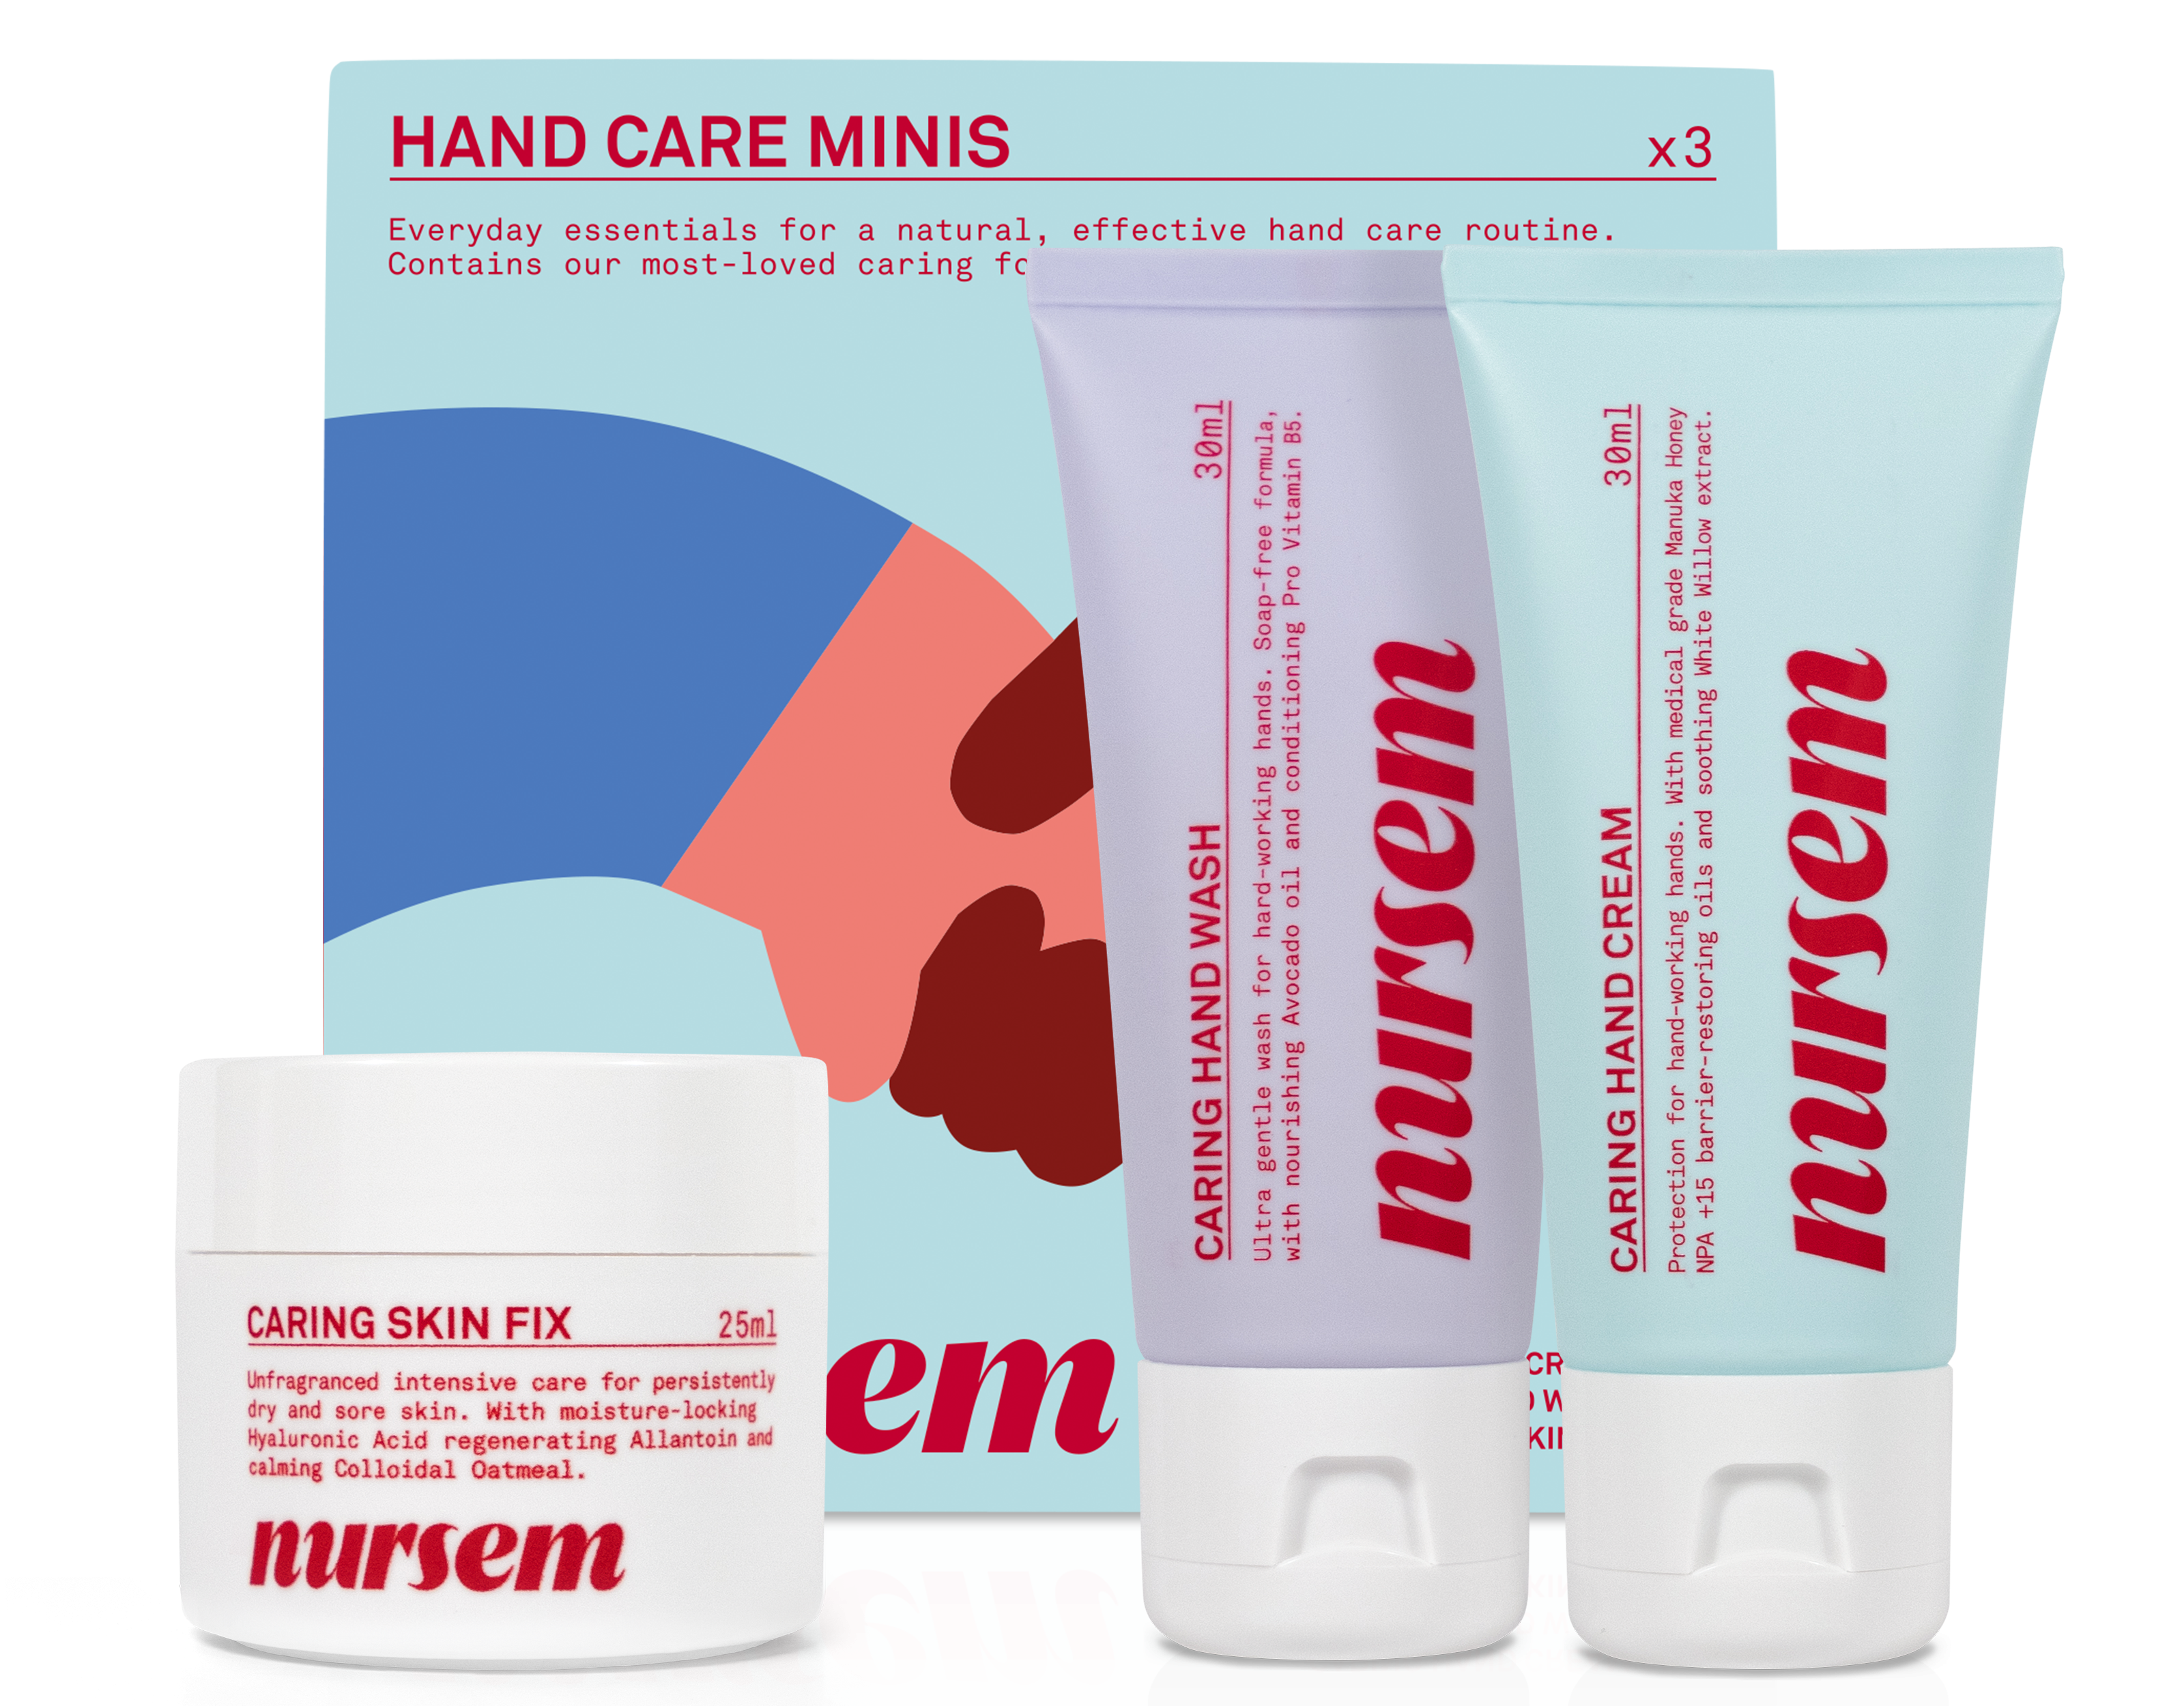 A selection of hand creams from Nursem to nourish skin